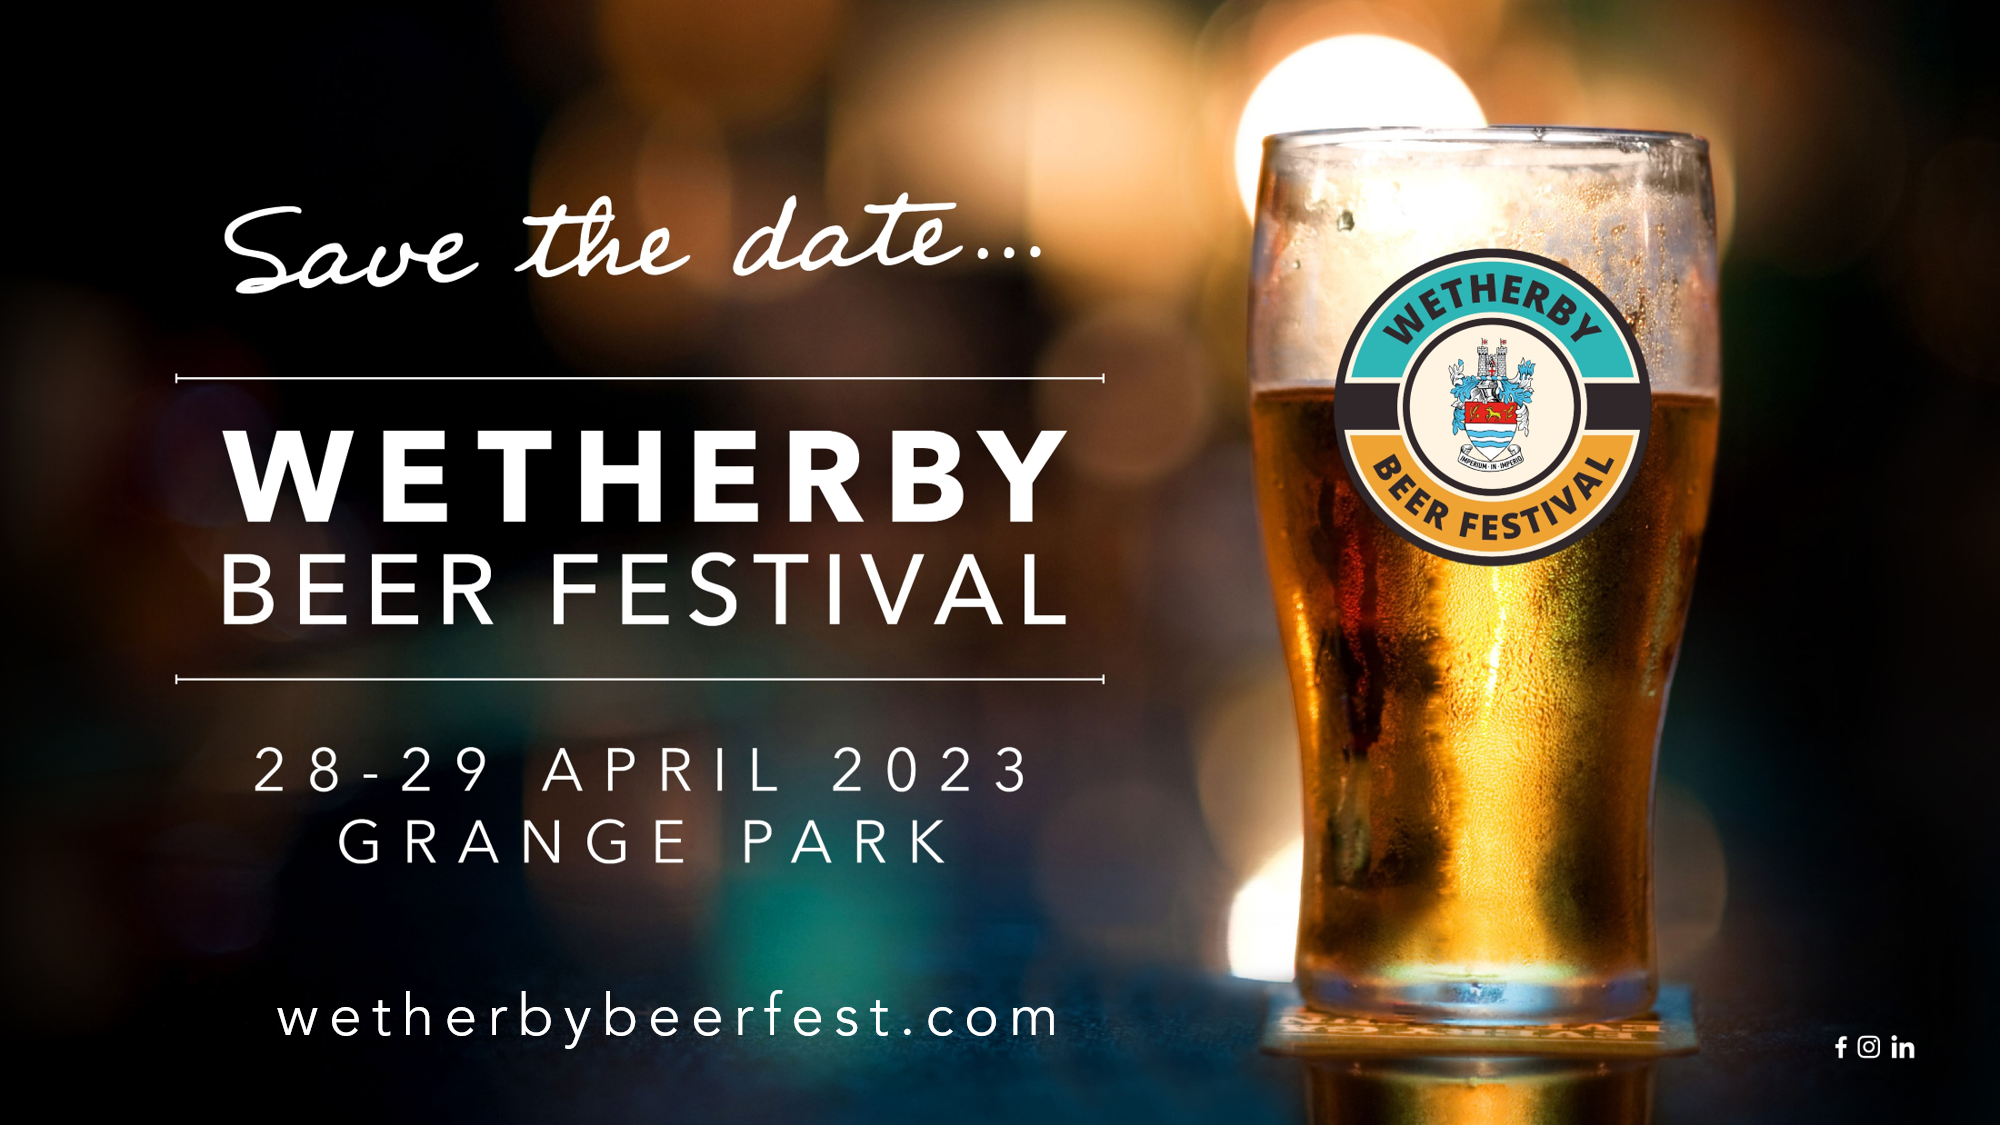 Image name save date with website1 the 30 image from the post Wetherby Beer Festival in Yorkshire.com.